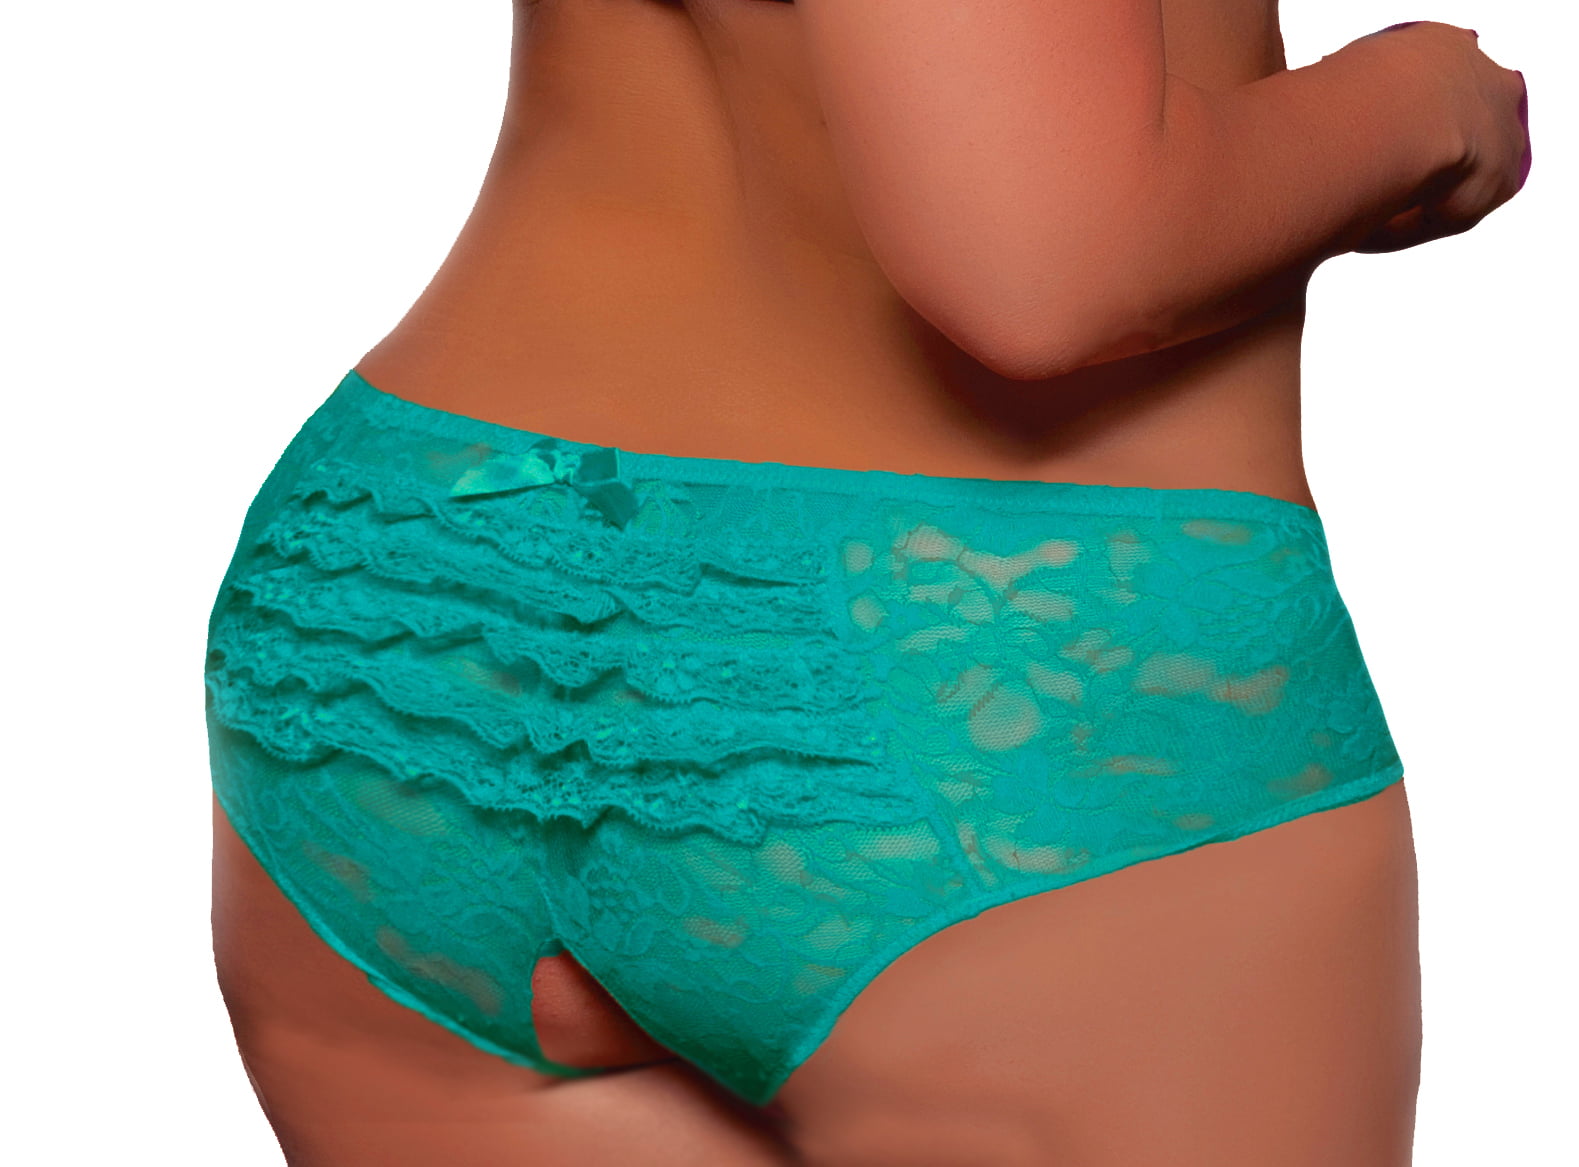 STRETCH LACE BLUE OPEN CROTCH SHORT PANTY WITH SATIN BOW DETAIL Size 1X-4X